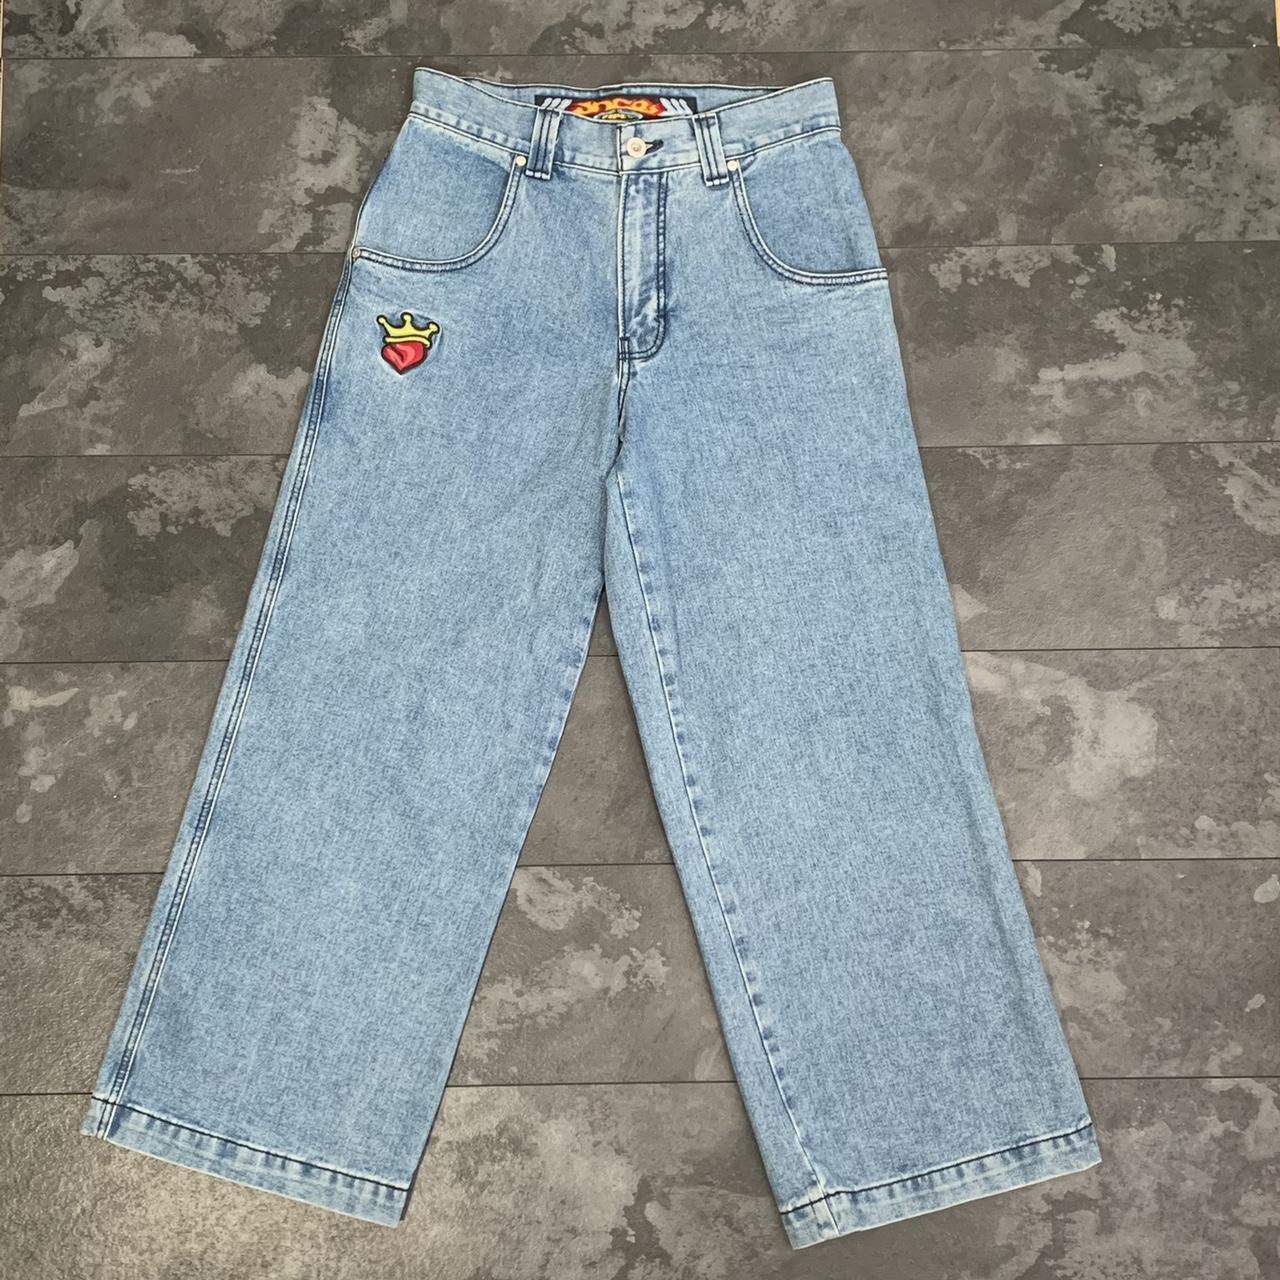 [Classic] JNCO O.G. 23” 179. Pipes Jeans The JNCO... - Depop